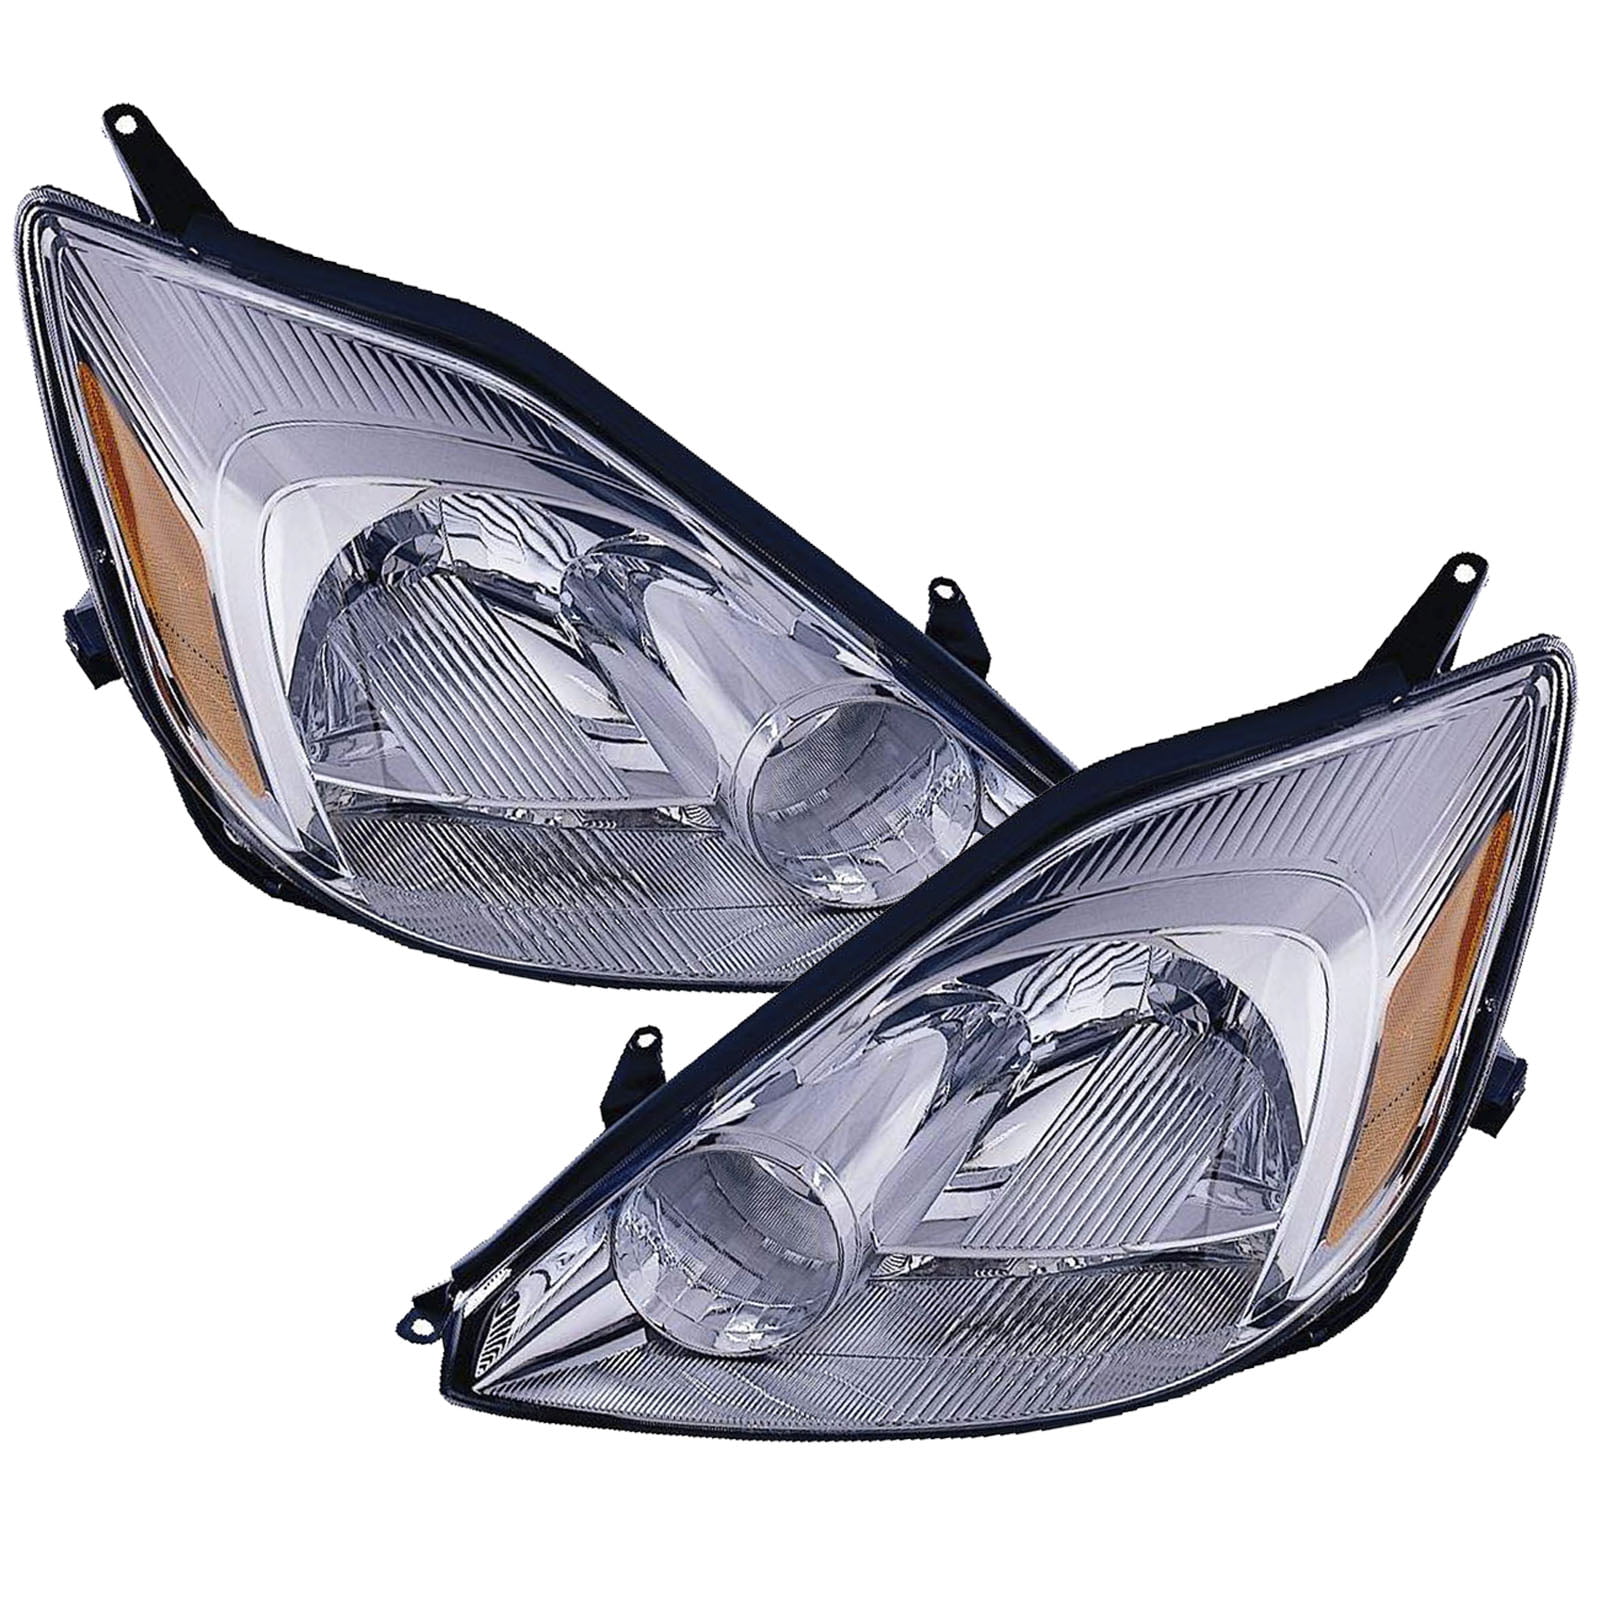 New Headlight for Toyota Sienna TO2503150 2004 to 2005 Passenger Side 